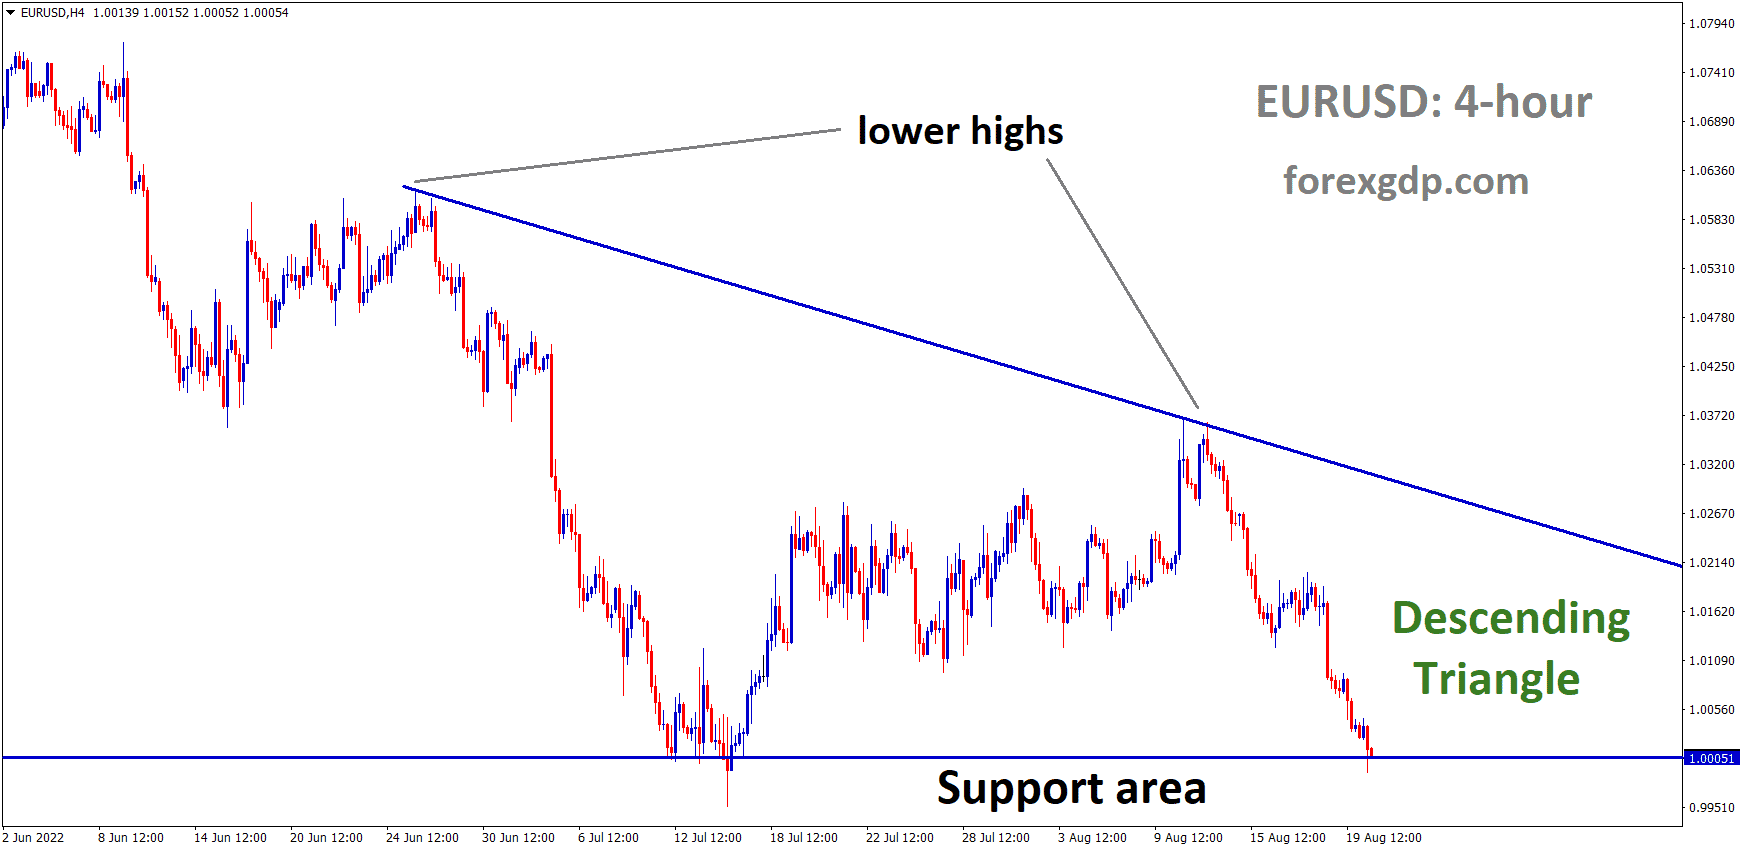 EURUSD is moving in the Descending triangle pattern and the Market has reached the Horizontal support area of the Pattern.